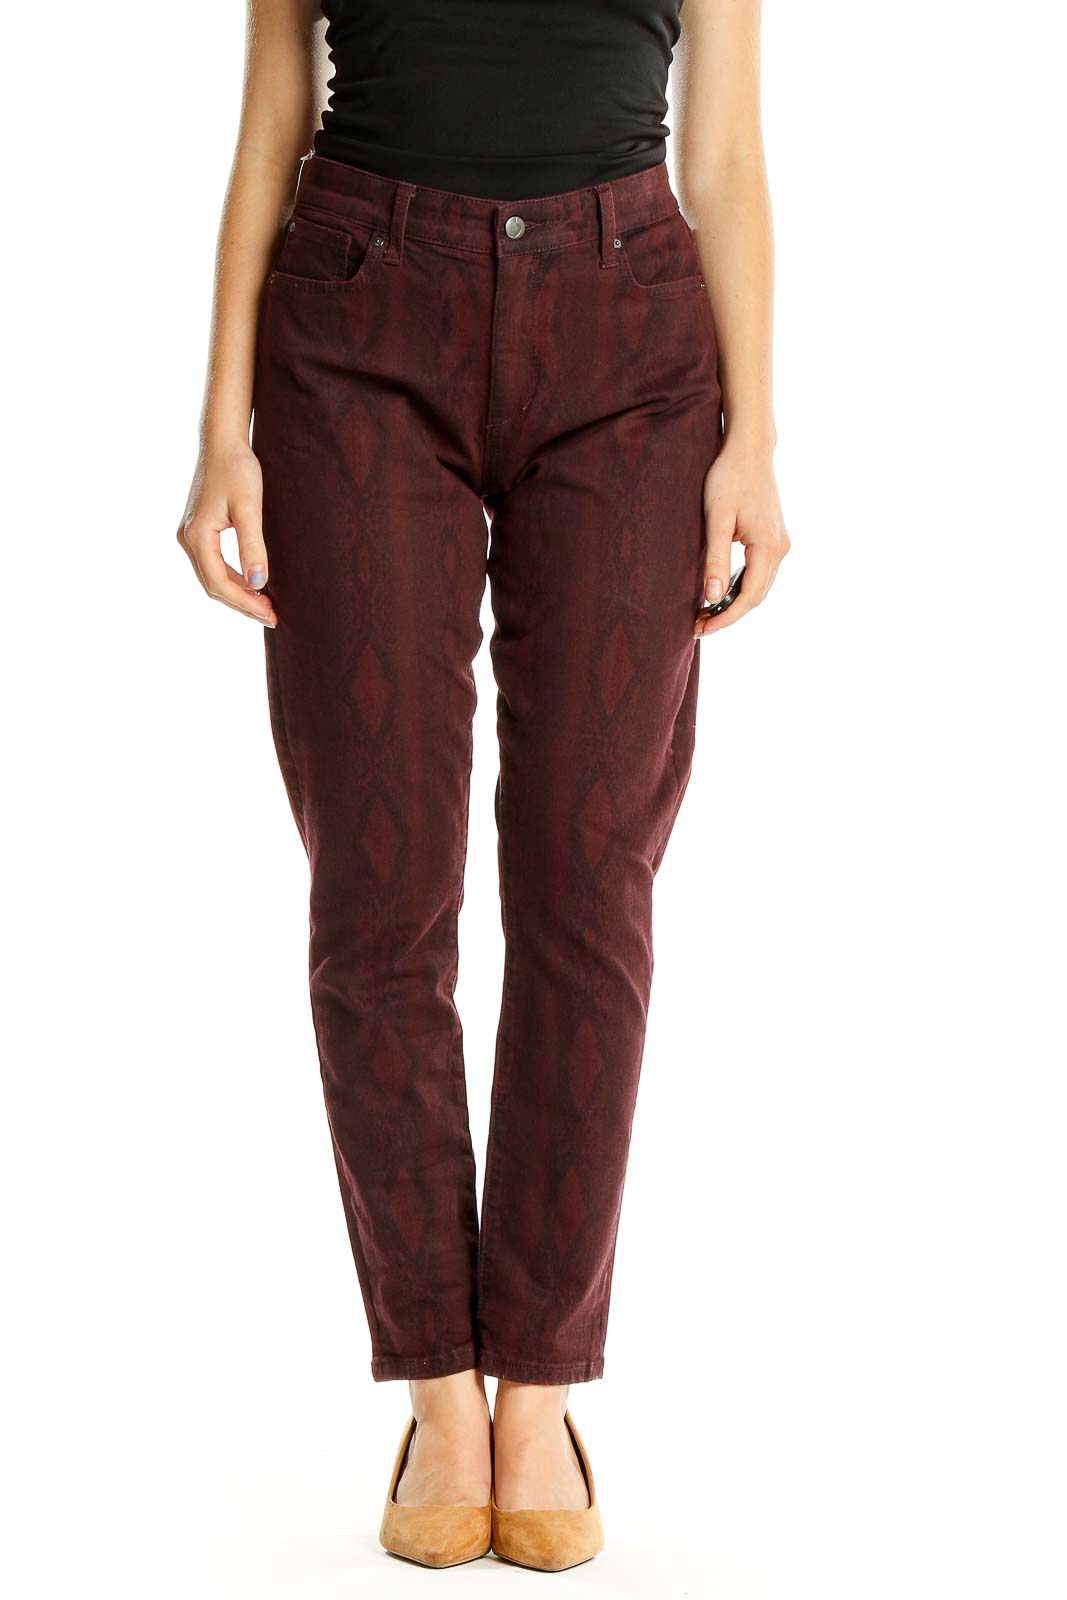 Maroon Animal Print Jeans Front